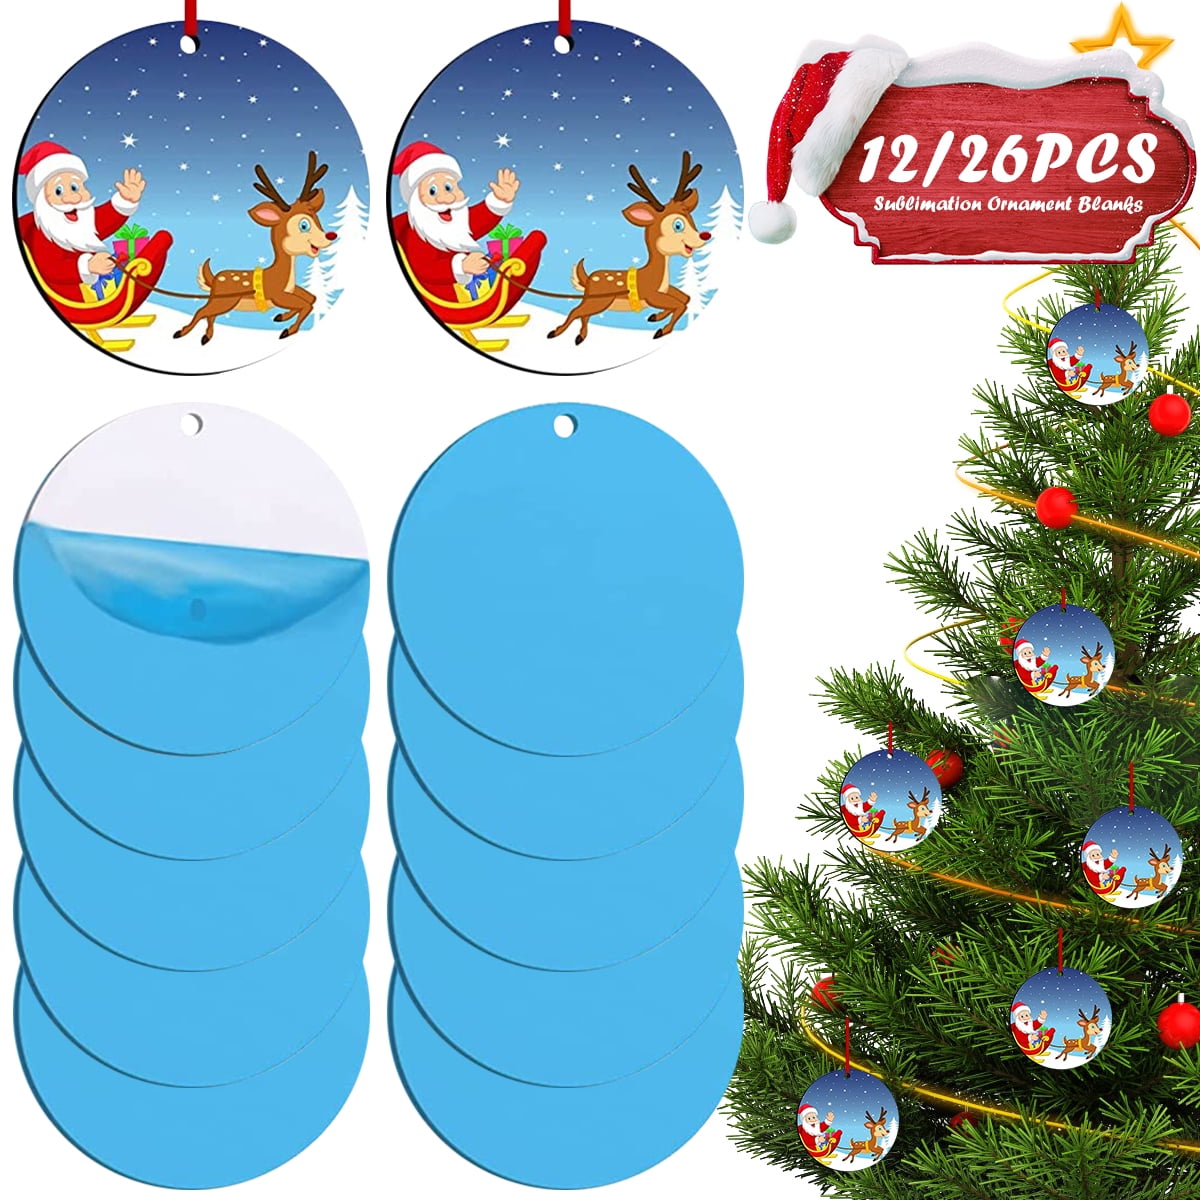  30 Pcs 3.15 Inch Acrylic Sublimation Ornament Blanks with  Holes, Round Acrylic Christmas Ornaments for DIY Painting, Hanging  Ornaments for Christmas Tree Decoration